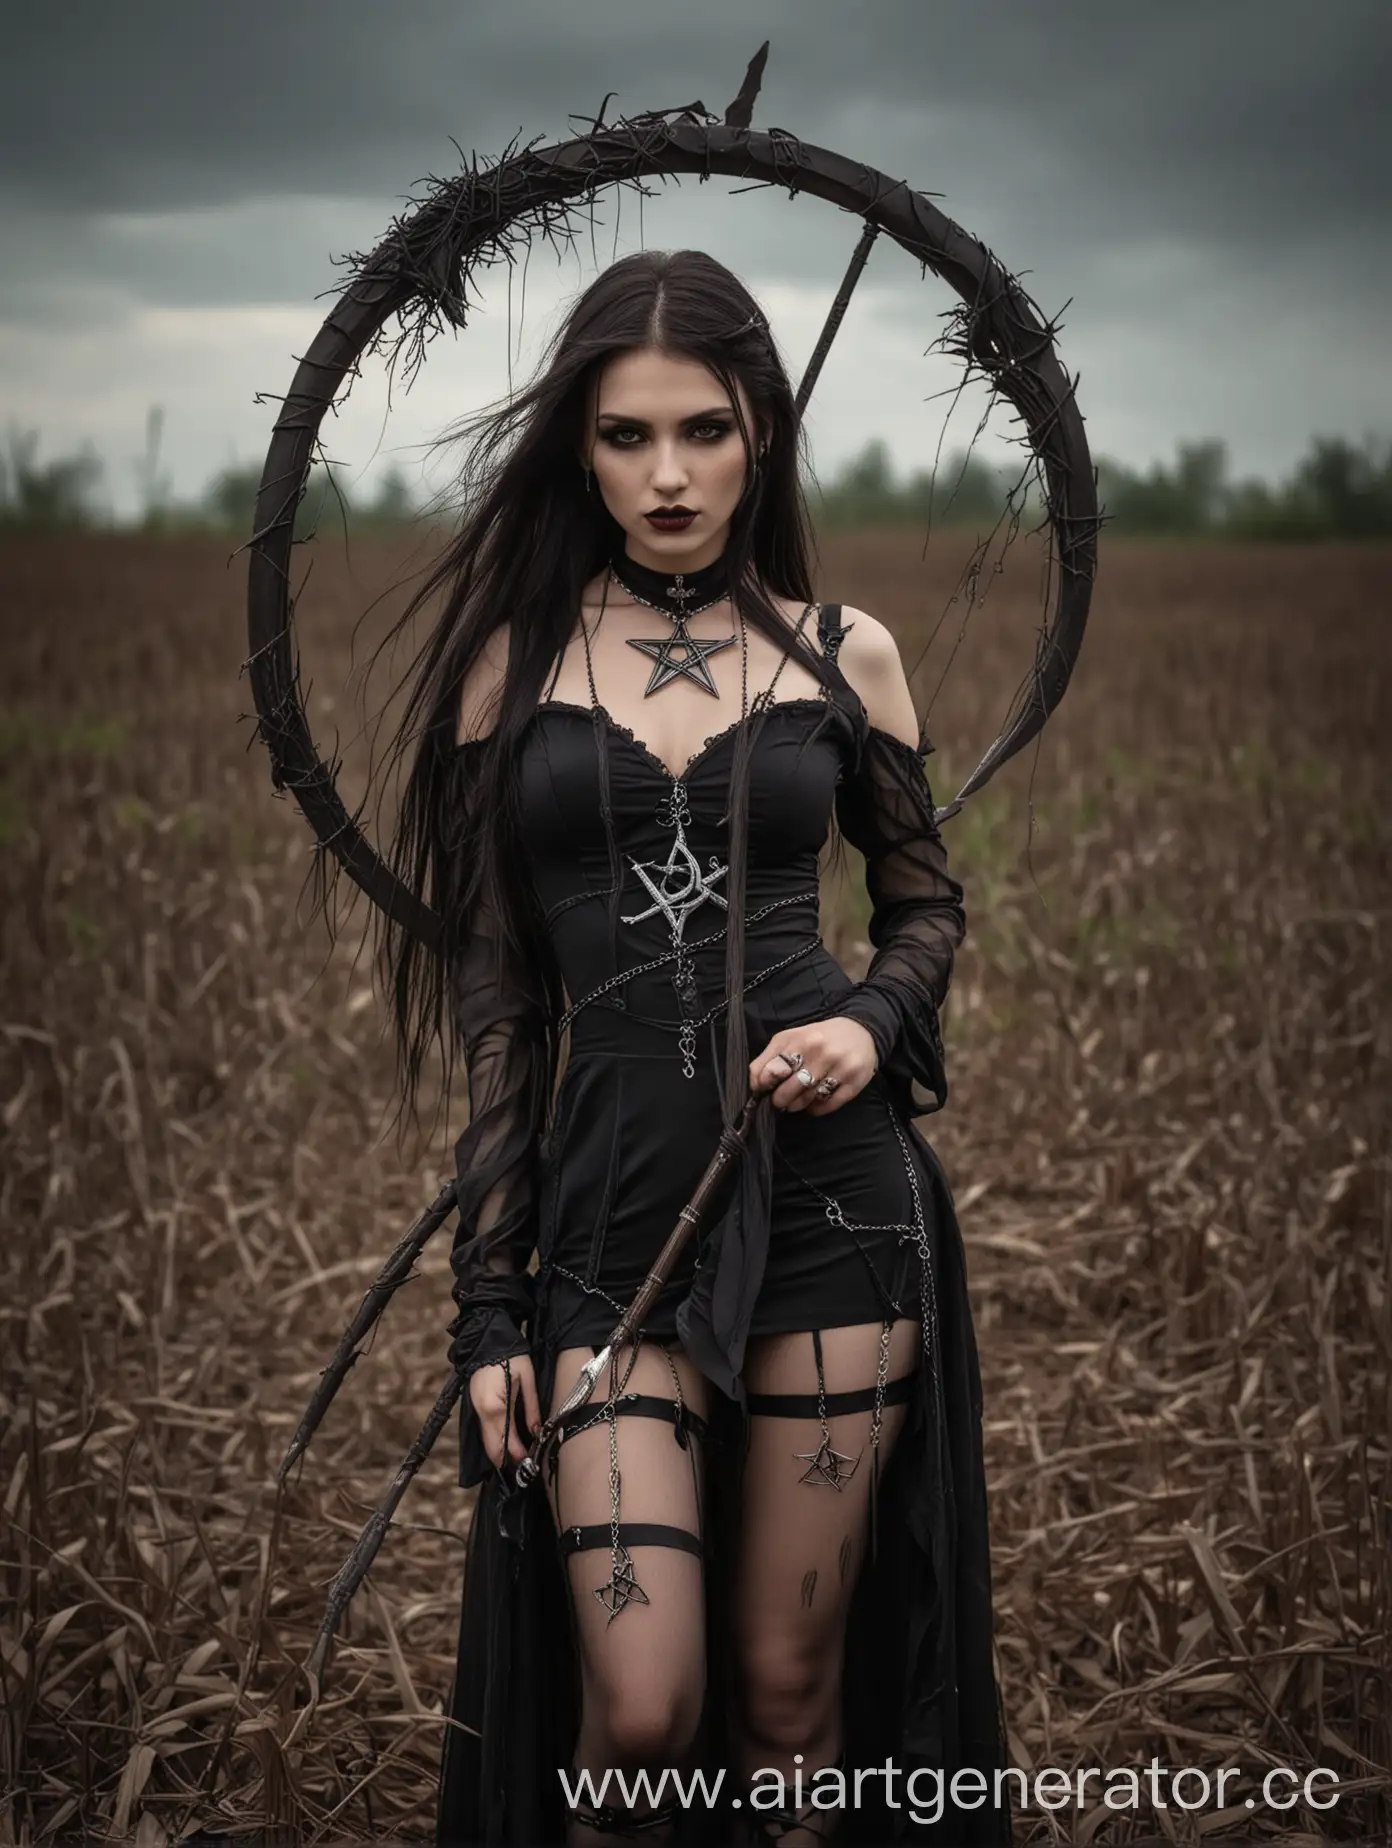 beautiful hot seductress girl fashion Goth model with a scythe in her hand and crow on her shoulder , sexy pose, long hair, black see through dress, seemed stockings, jewellery chain with pentagram, dark corn field on the background, side view,dark aesthetic